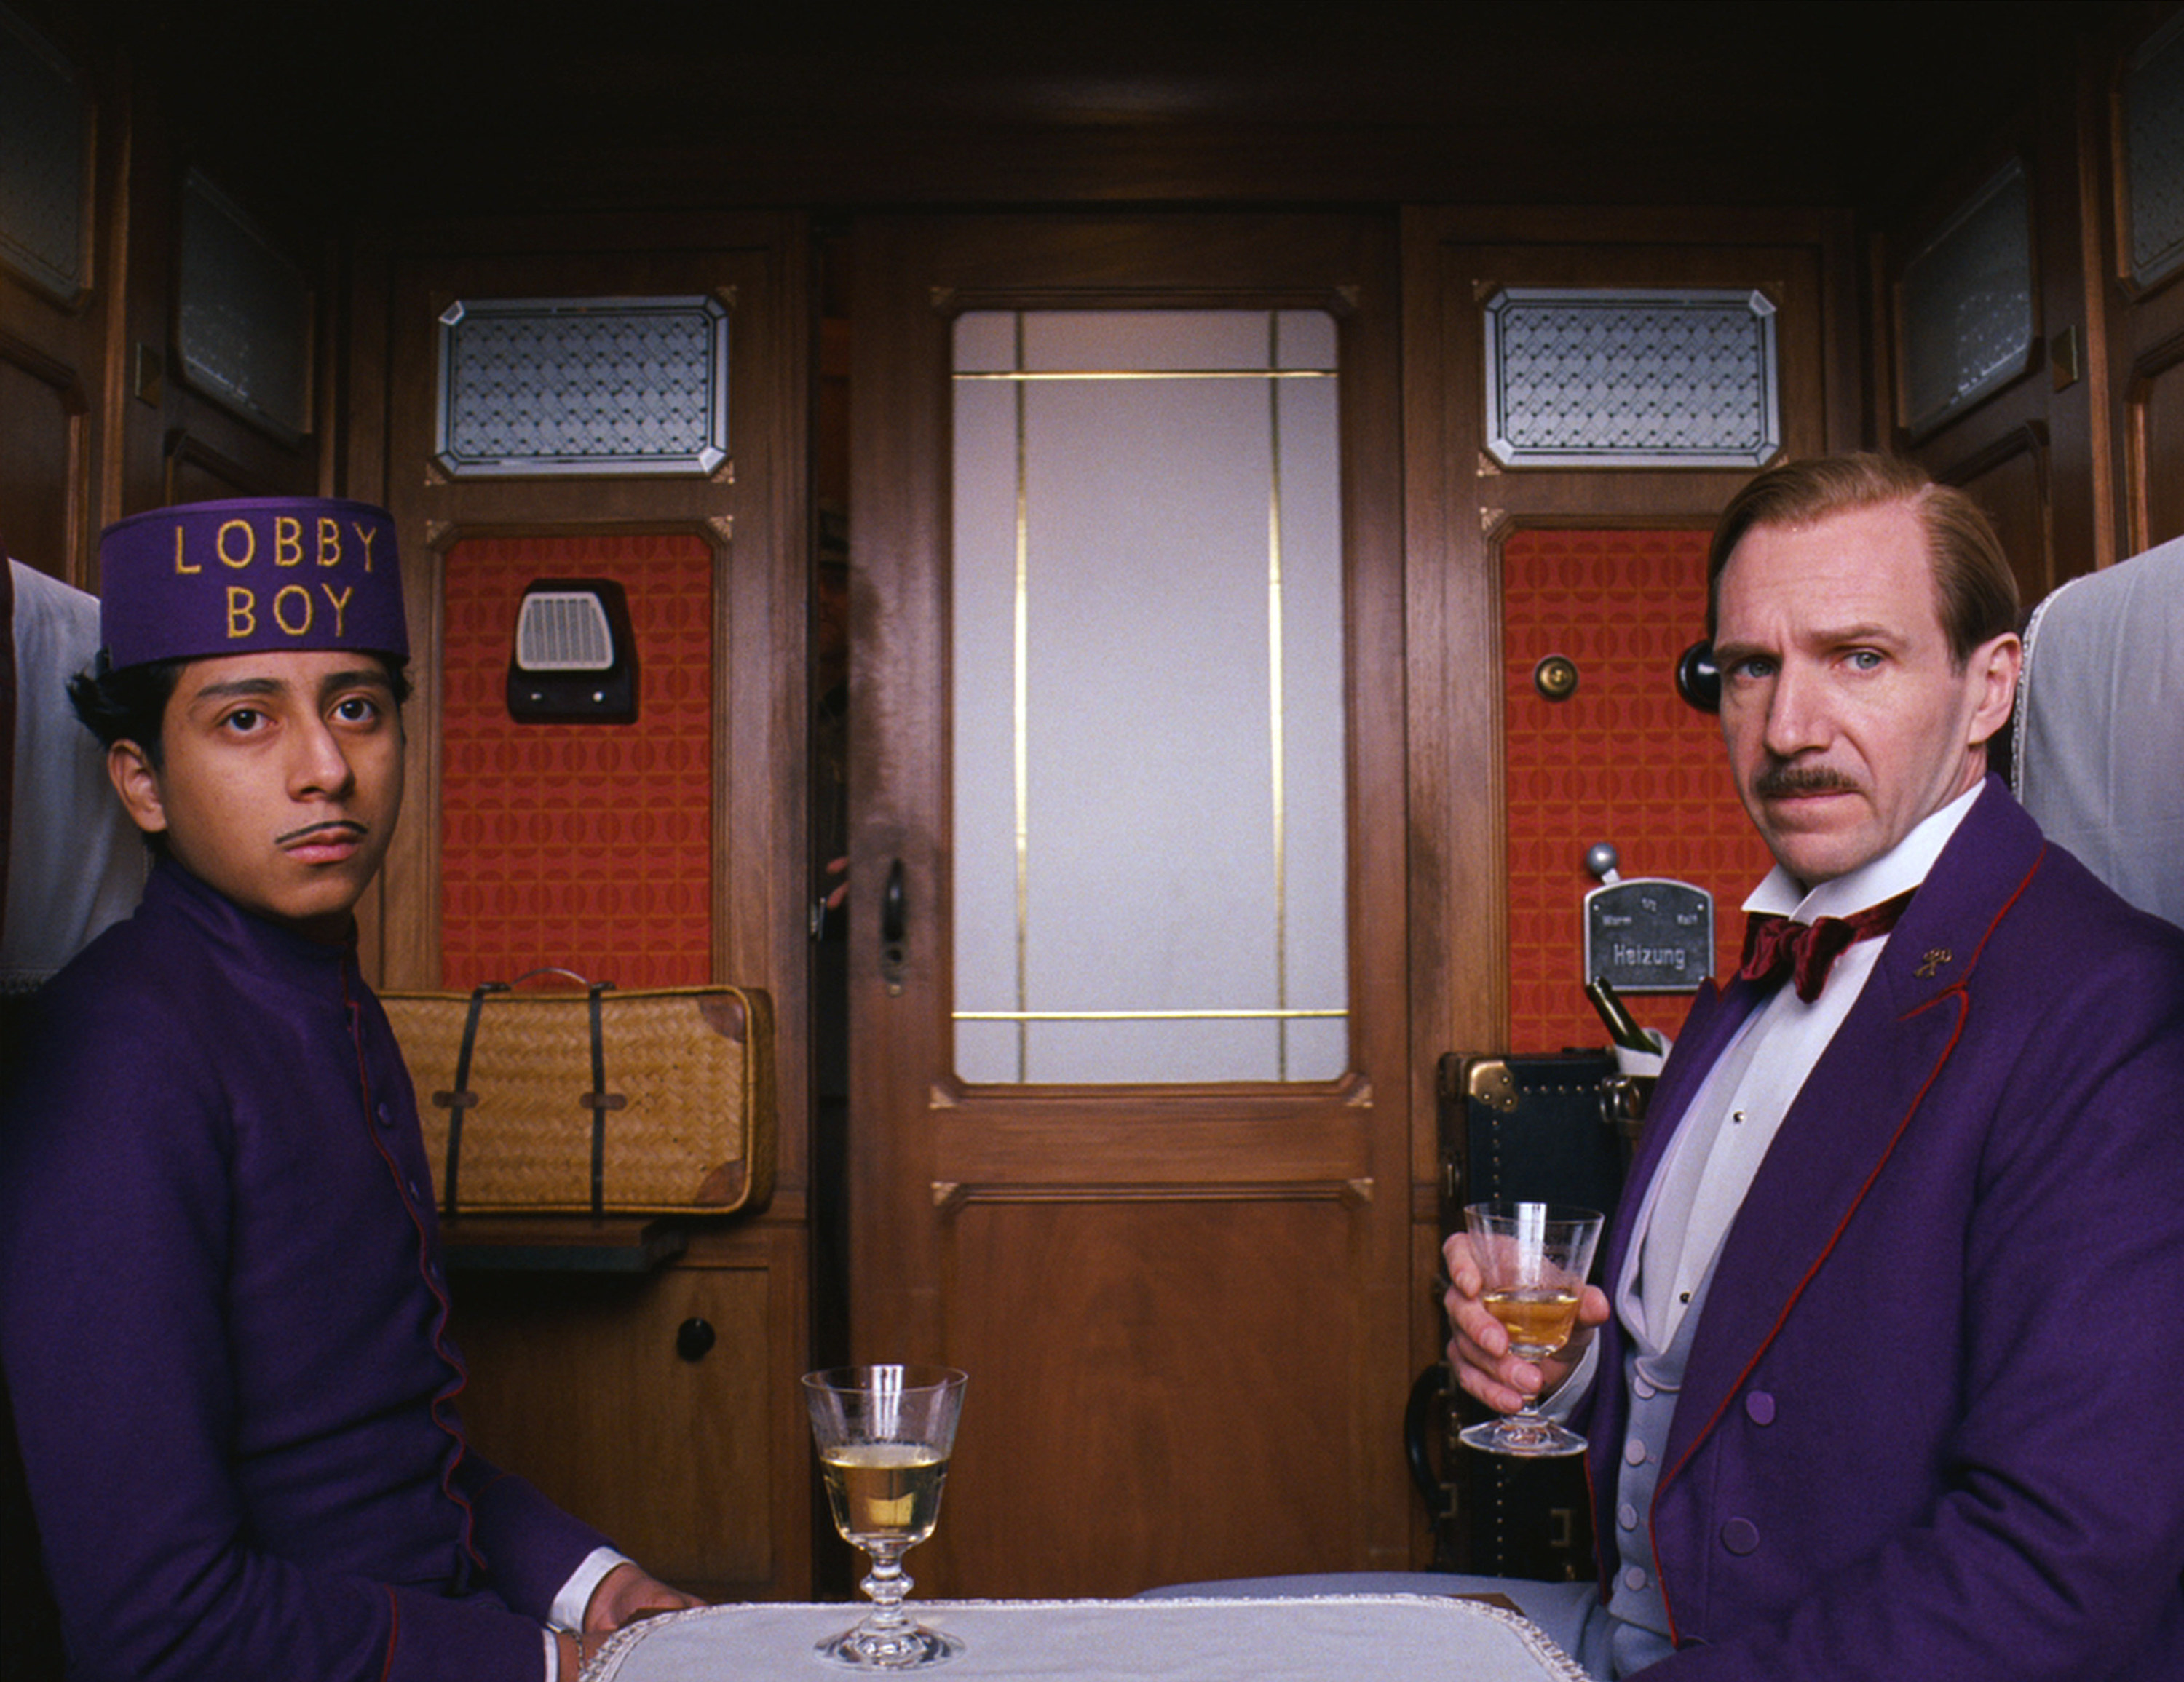 Ralph Fiennes and Tony Revolori  on a train in their hotel uniforms in the grand budapest hotel